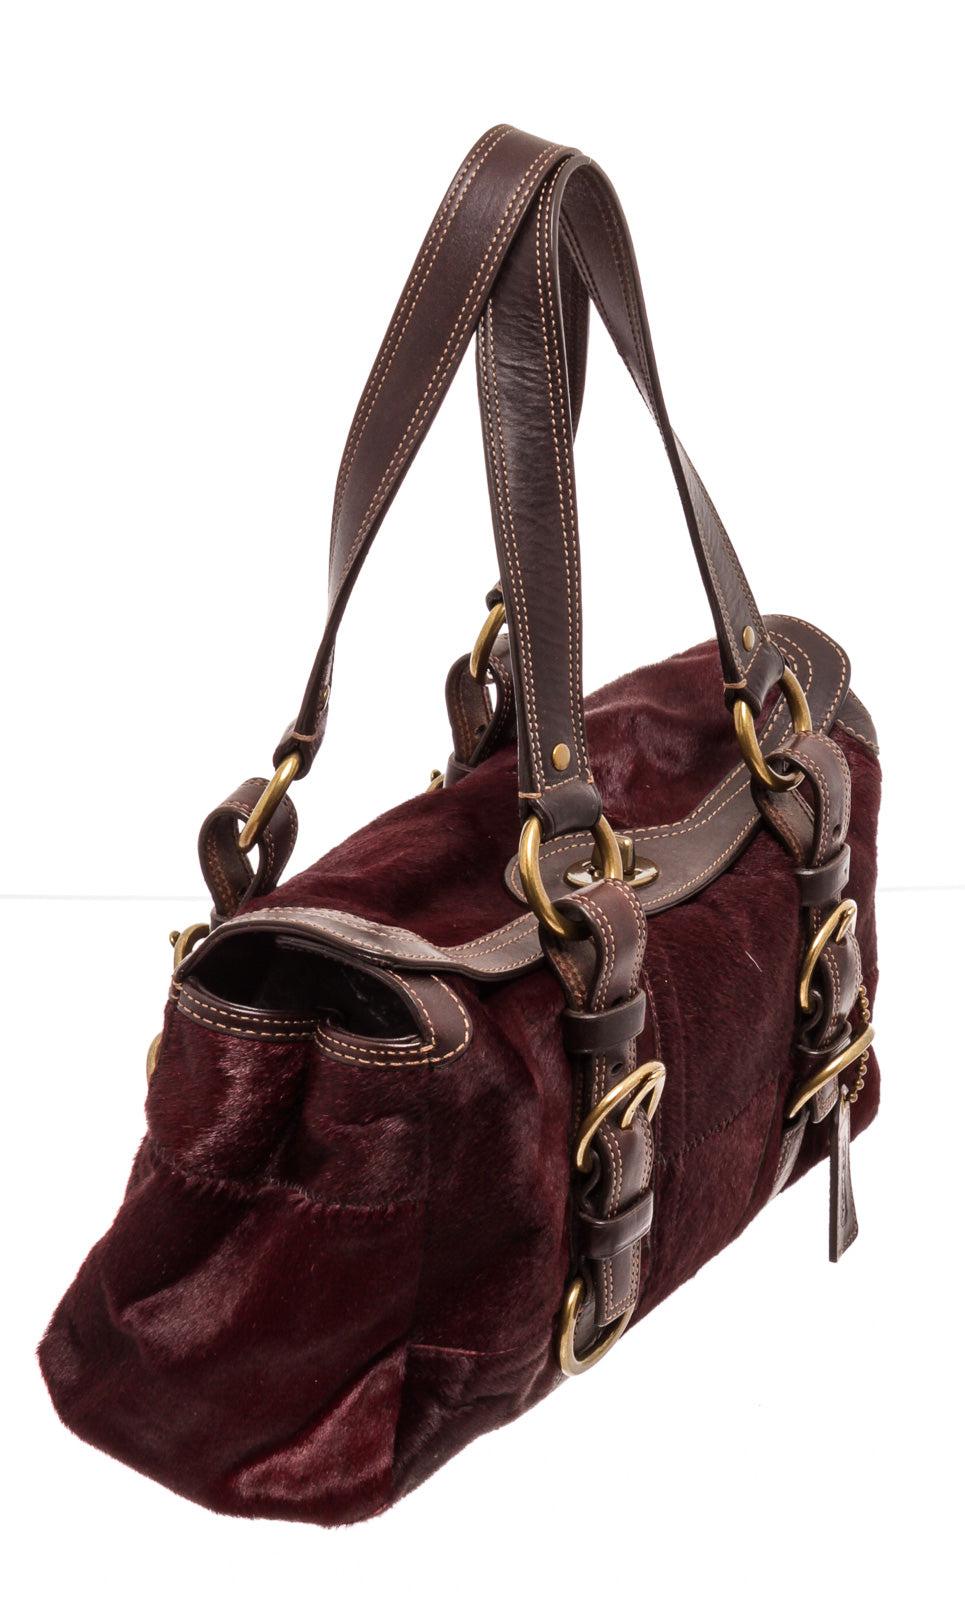 Coach red limited edition pony hair turnlock satchel with gold-tone hardware, dual flat top handles, brown leather trim, red silk interior lining, three interior pockets; one with zip closure and overall turnlock closure at top.
25095MSC